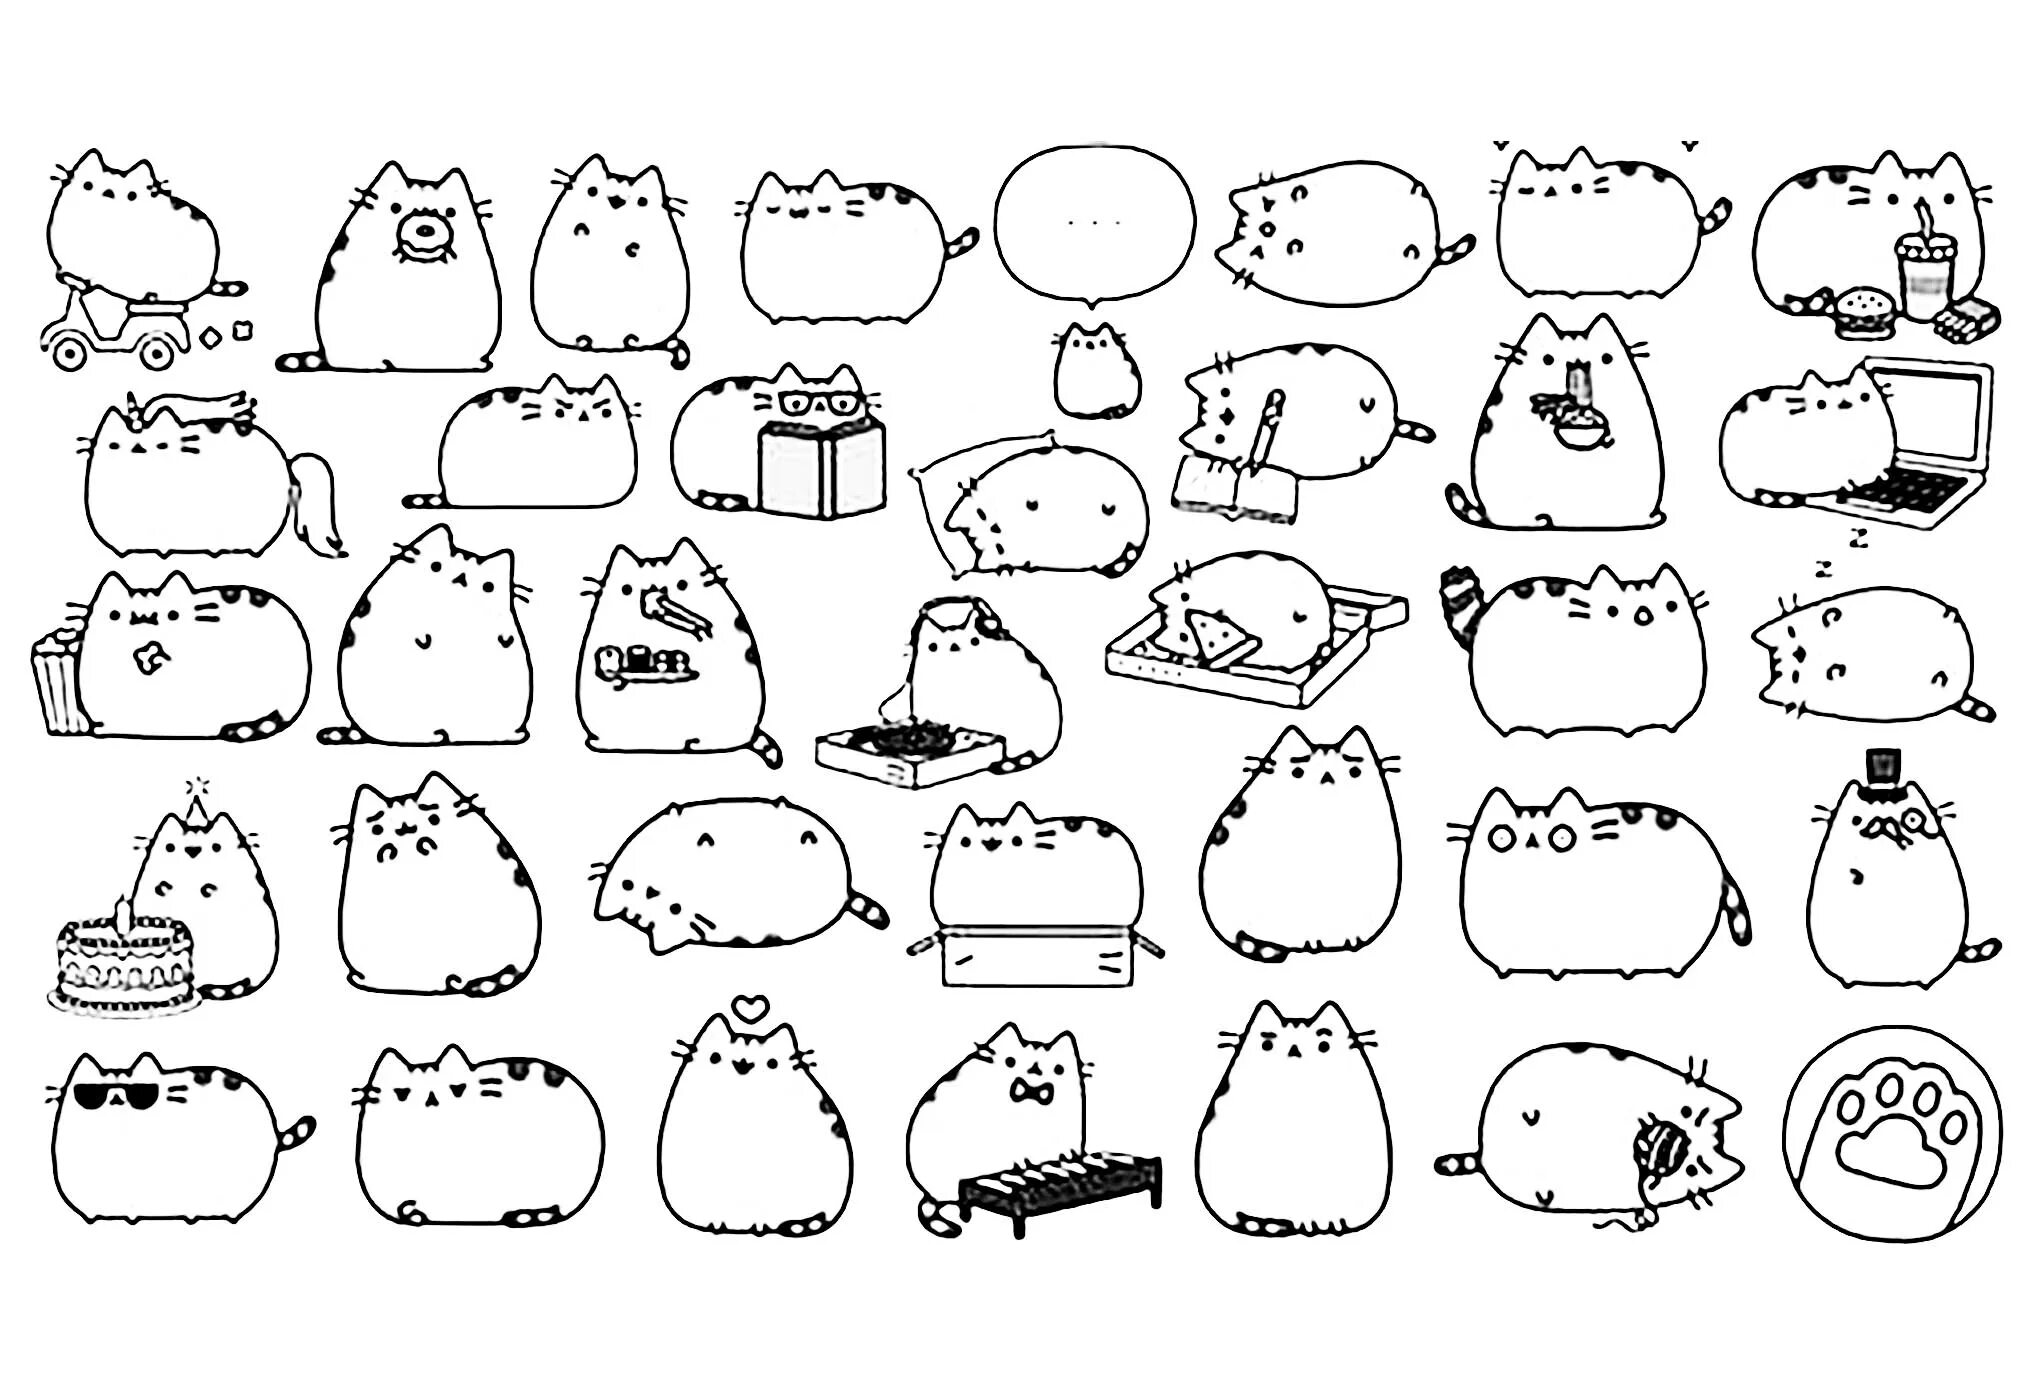 Witty pusheen cat coloring page